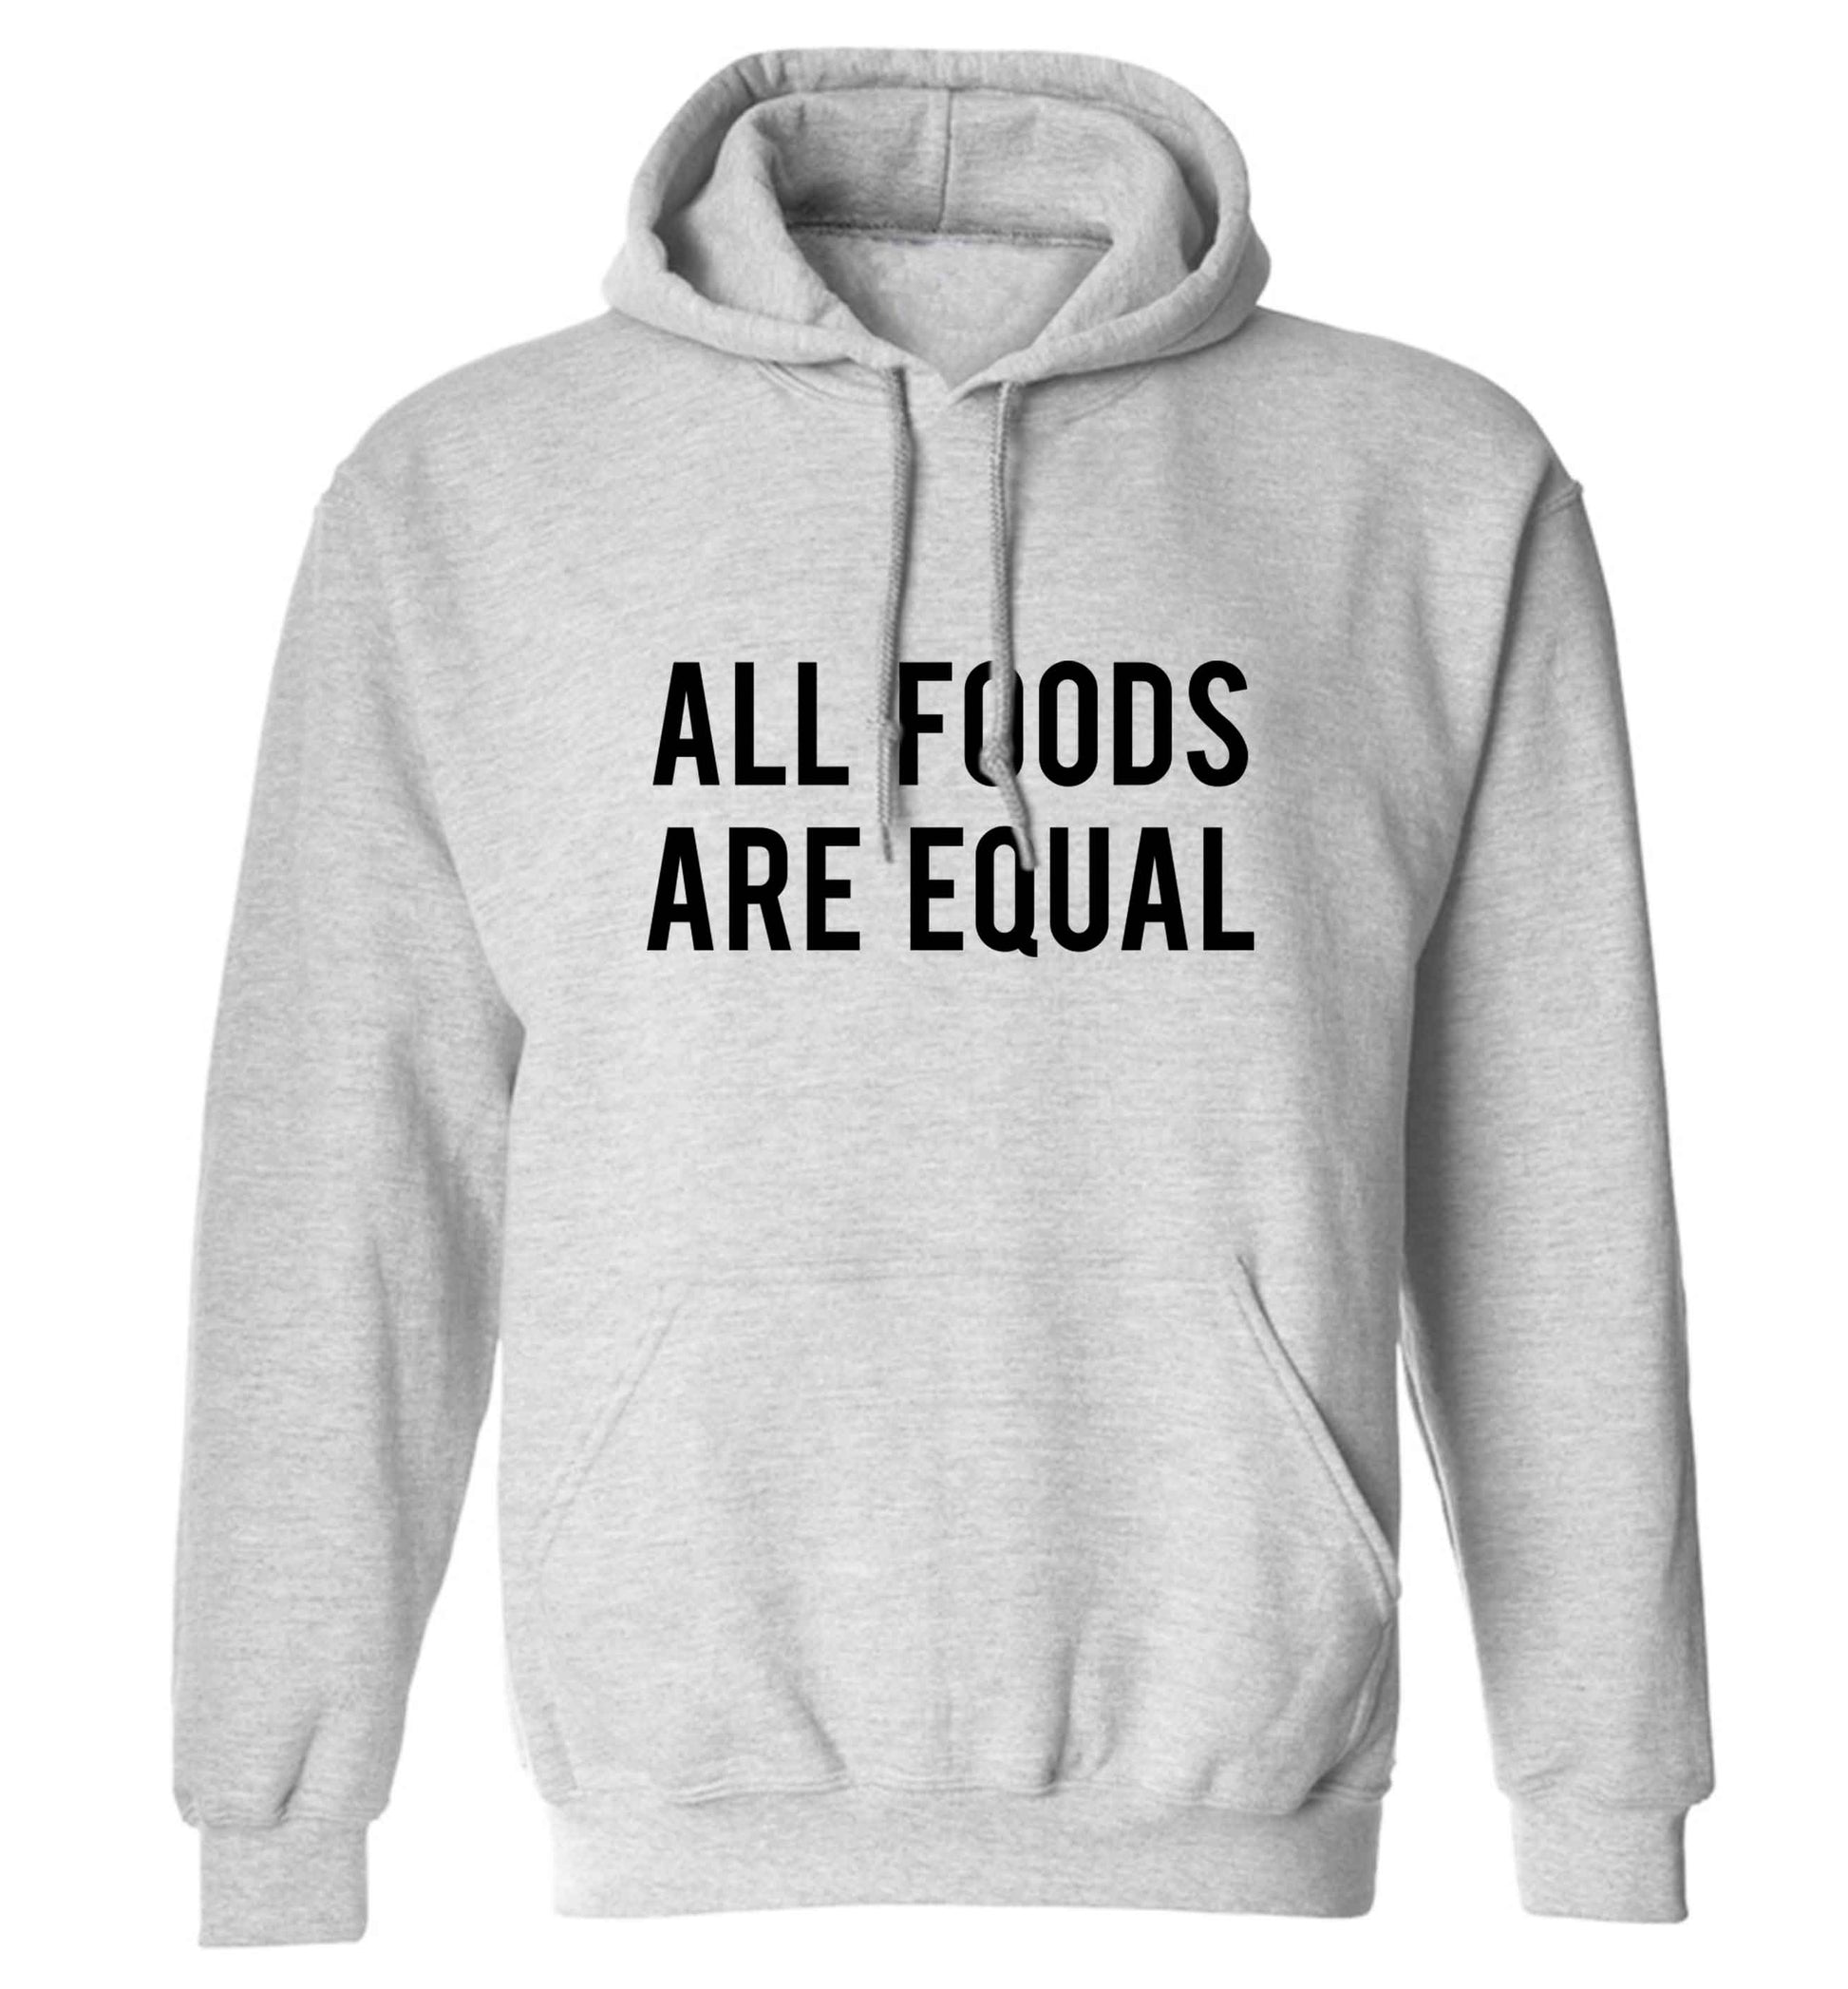 All foods are equal adults unisex grey hoodie 2XL